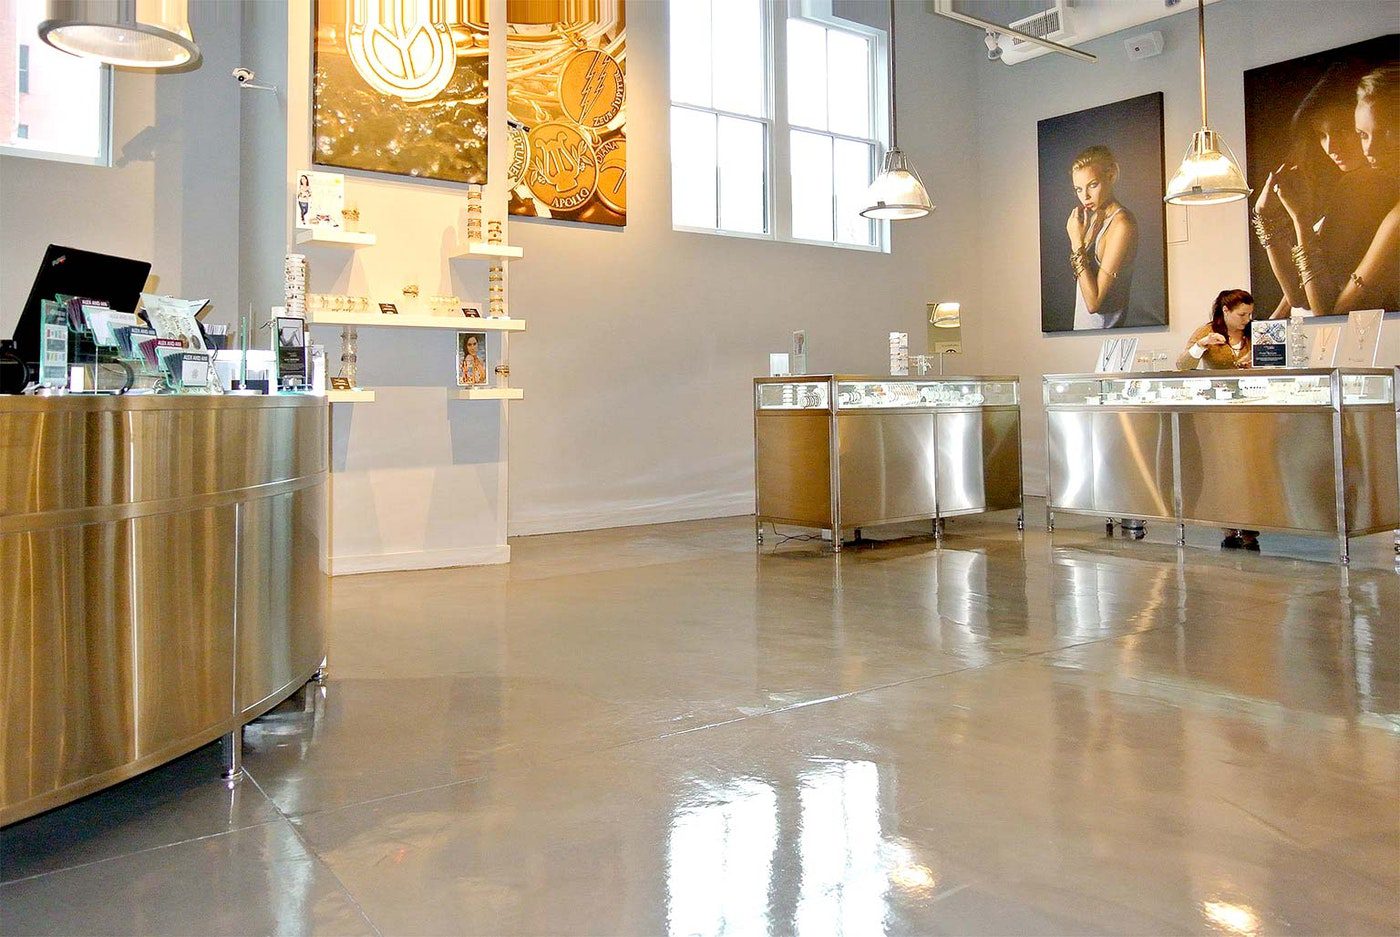 Alex and Ani Retail Store Polished Concrete FlooringnbspThe High end Jewelry Retailer Alex and Ani Gets a Polished Concrete Floor for Their Flagship Store | Duraamen | Duraamen Engineered Products Inc